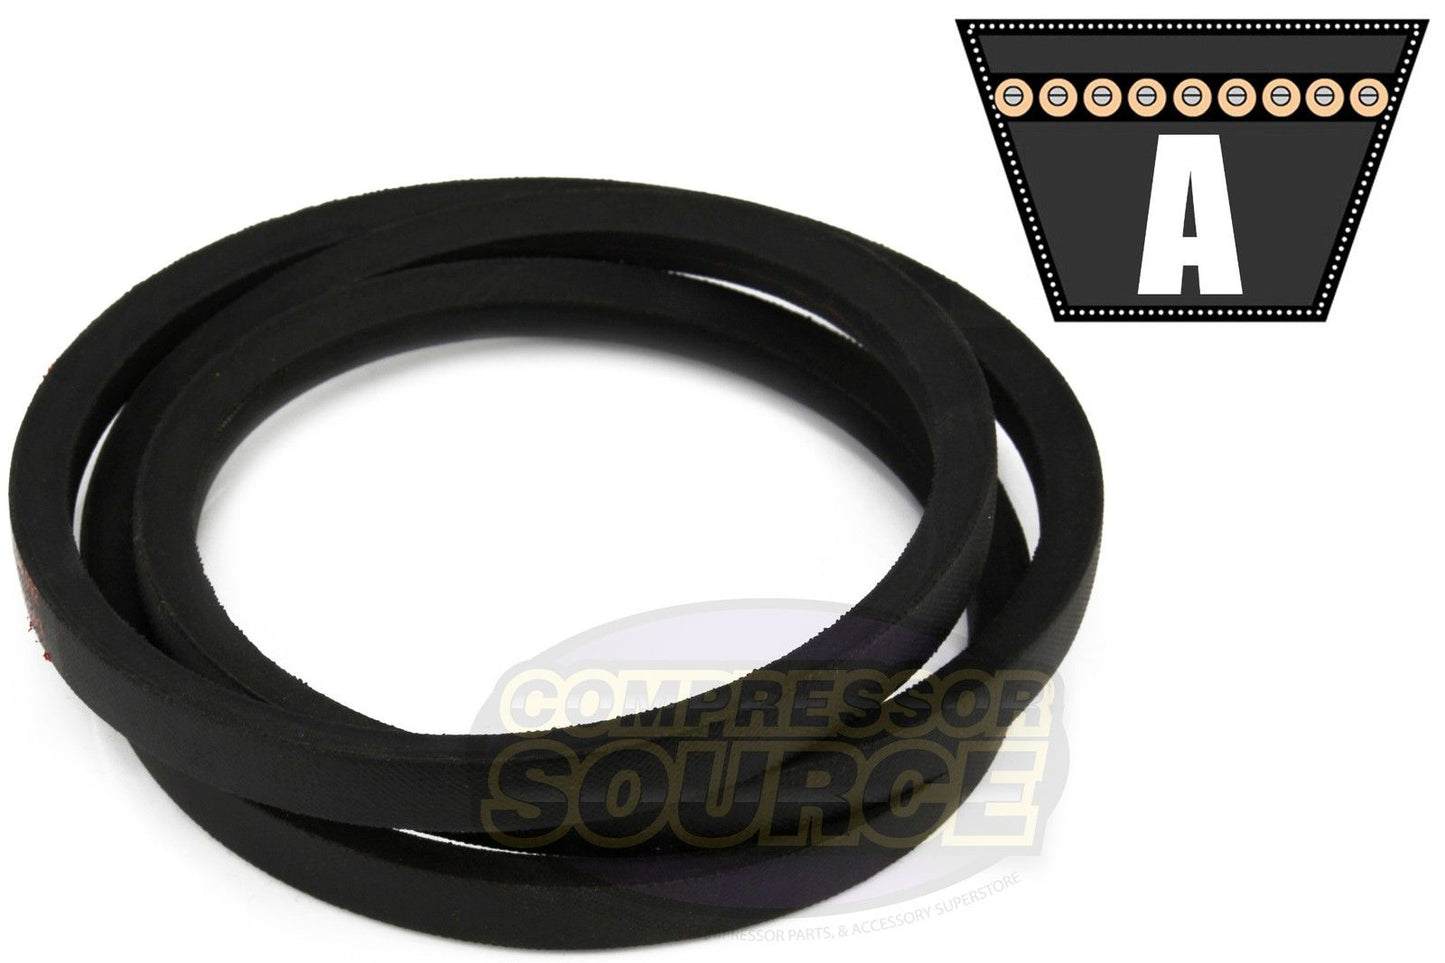 A70 Replacement High Quality Industrial & Lawn Mower 1/2" x 72" V Belt 4L720